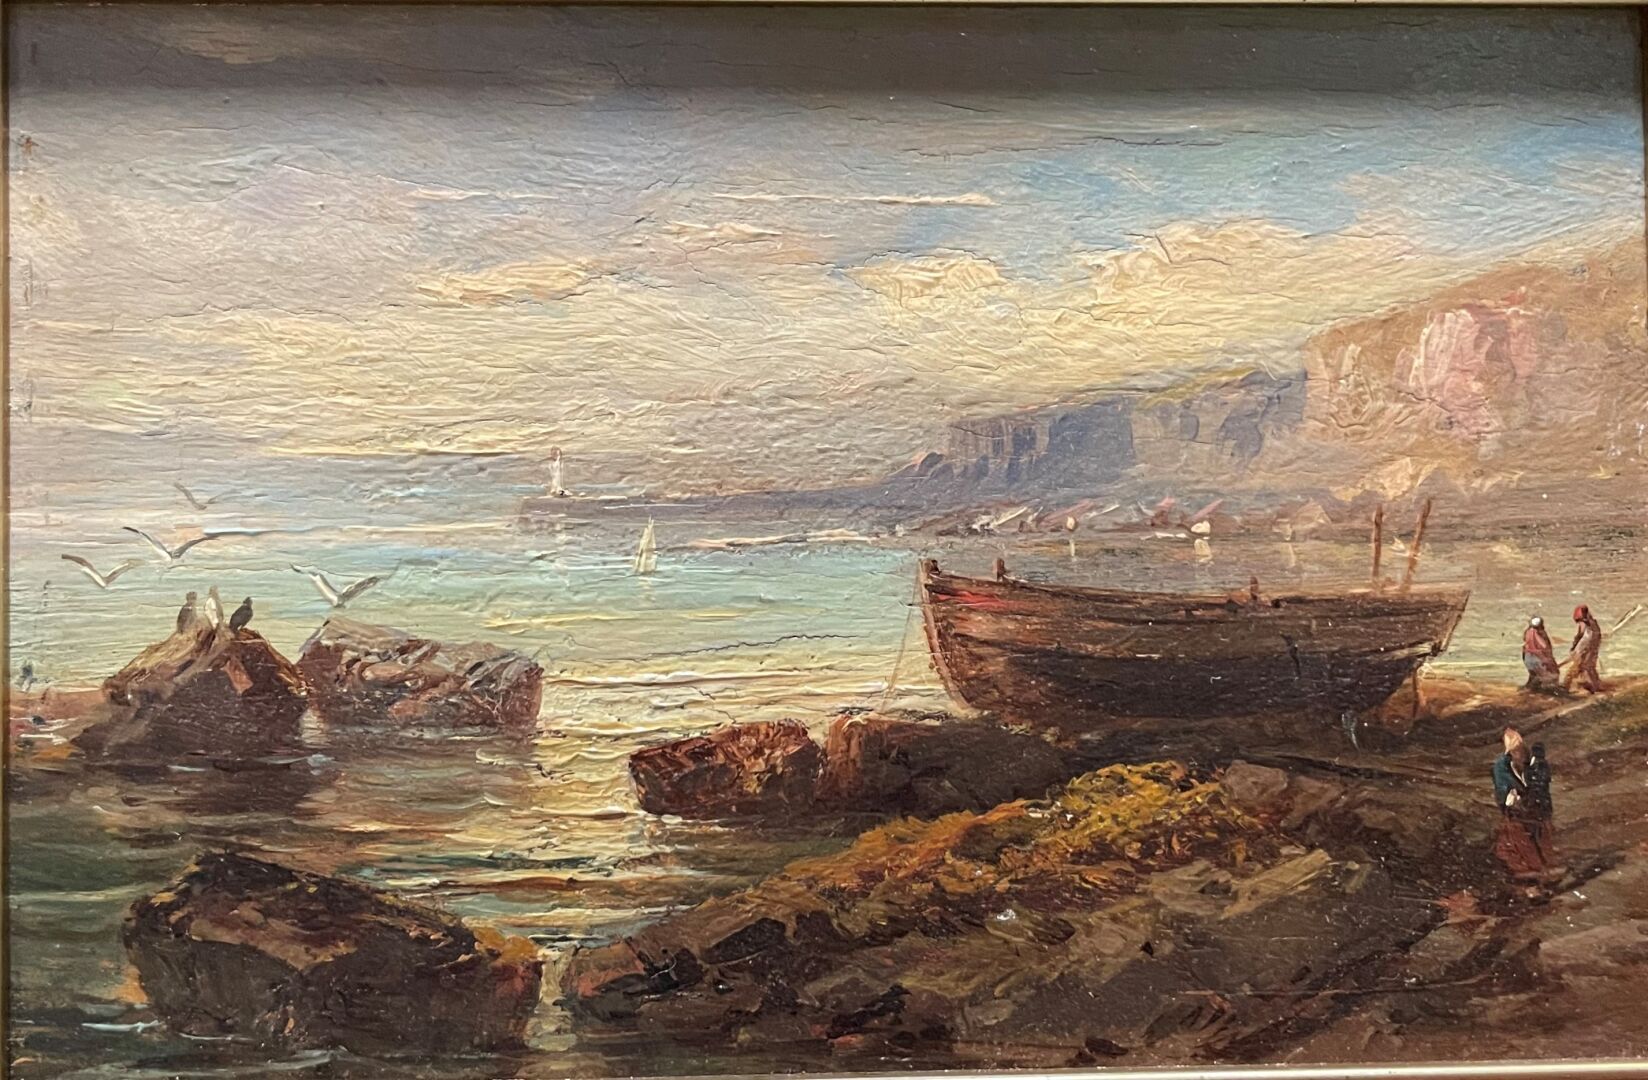 Null French school of the 19th century

Boat at the foot of the cliffs

Oil on p&hellip;